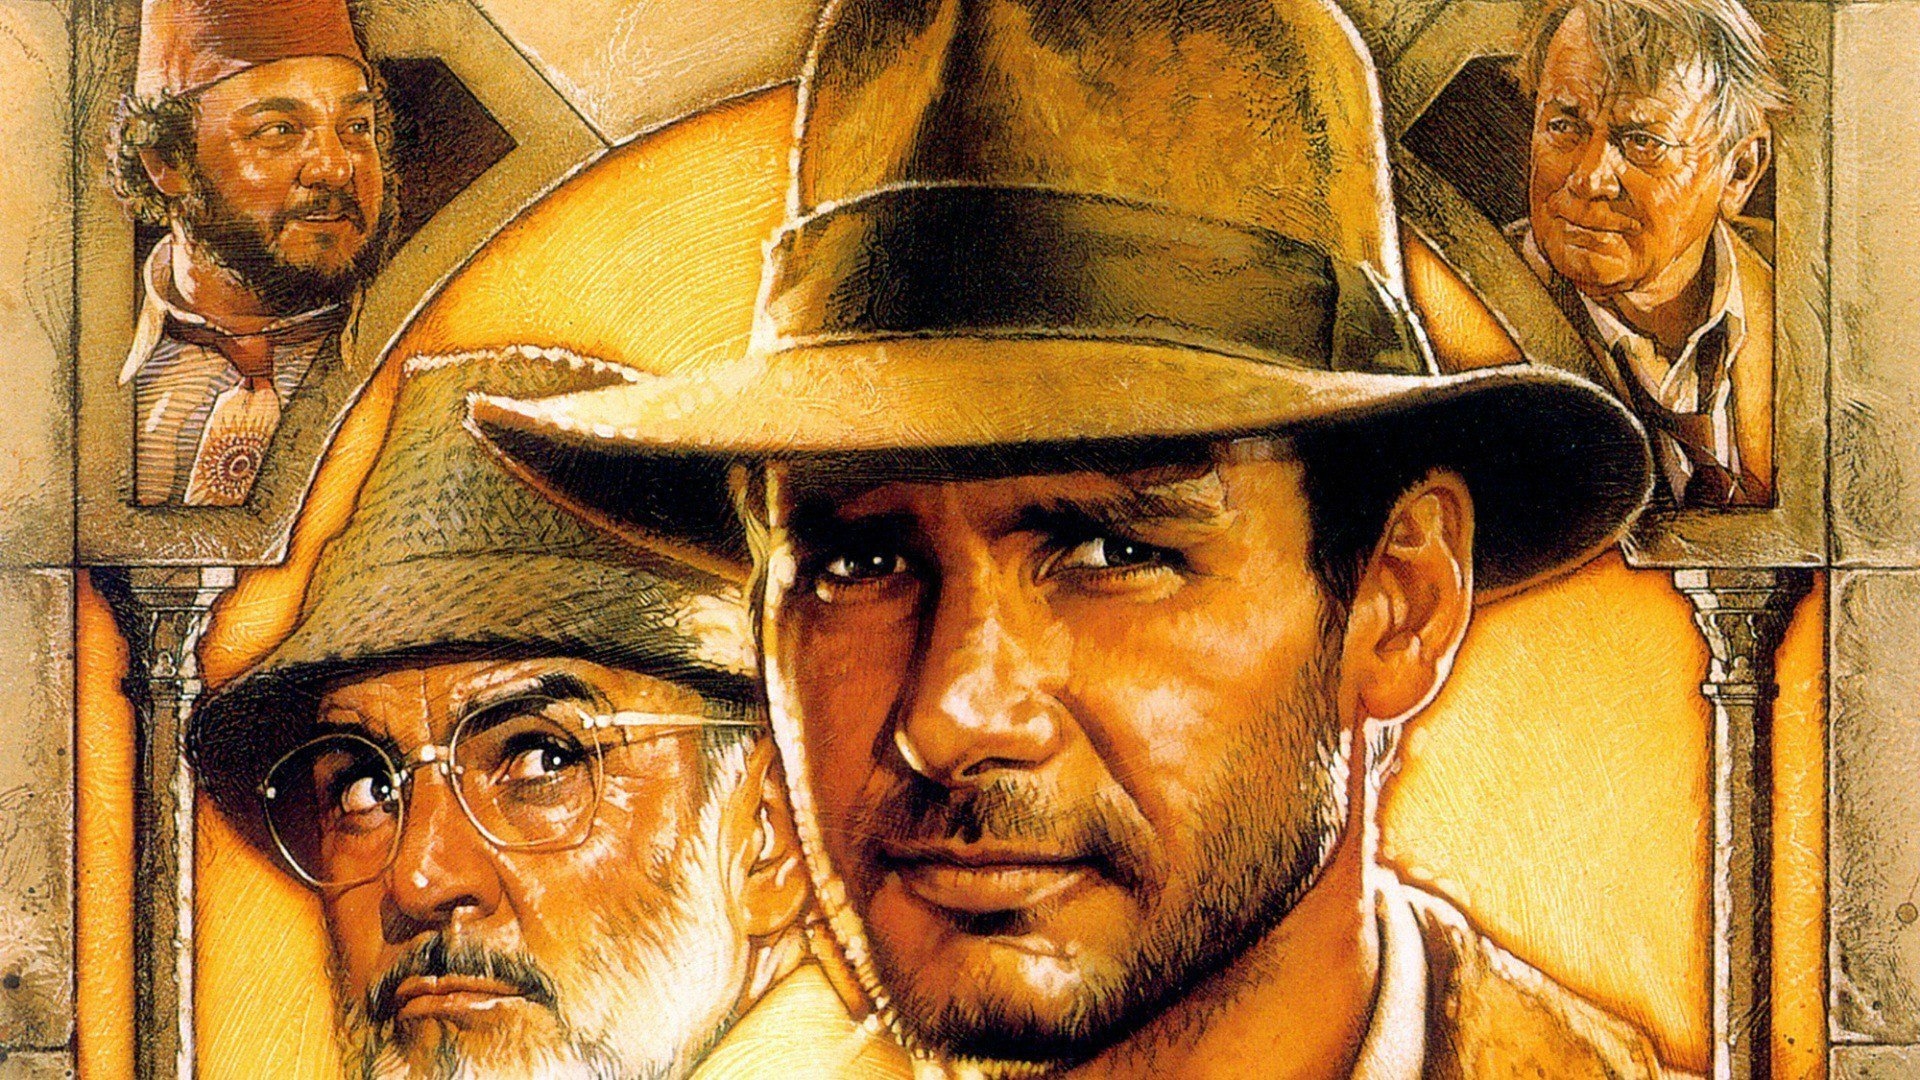 Indiana Jones Wallpaperns Indiana Jones wallpapers 2K wallpapers and